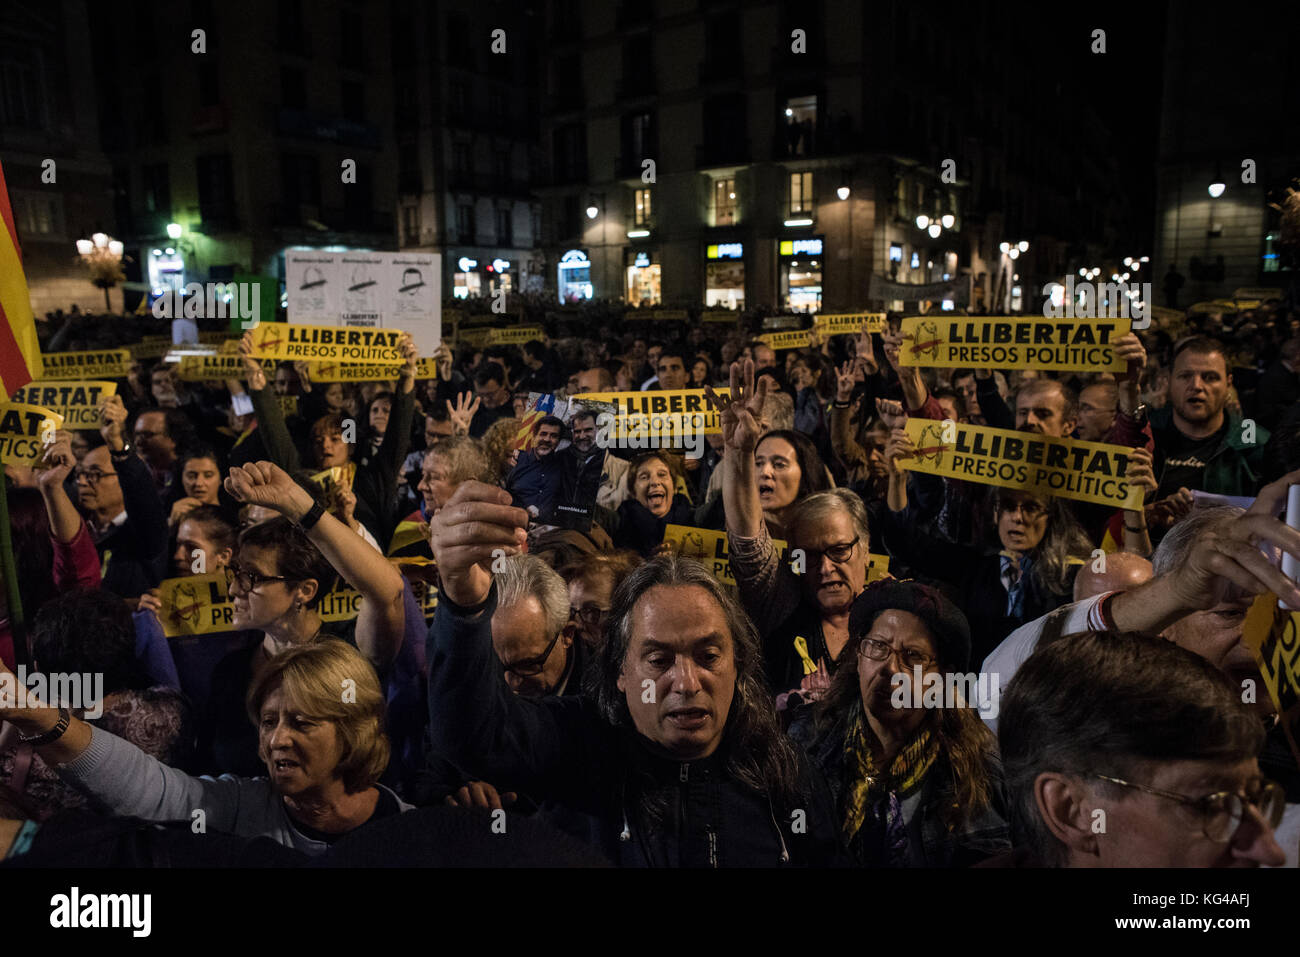 Barcelona, Spain. 3rd Nov, 2017. Thousands of people demonstrate in Plaça Sant Jaume against the imprisonment of Oriol Junqueras, vice president of the Catalan Government, and seven councilors. The National Court has also denied the release of Jordi Sánchez and Jordi Cuixart, civil leaders of the independence movement. Carles Puigdemont, the dismissed president of the Catalan Government, carries out his defense strategy from Brussels, from where he has refused to go to the National Court. Credit: Carles Desfilis / Alamy Live News Stock Photo